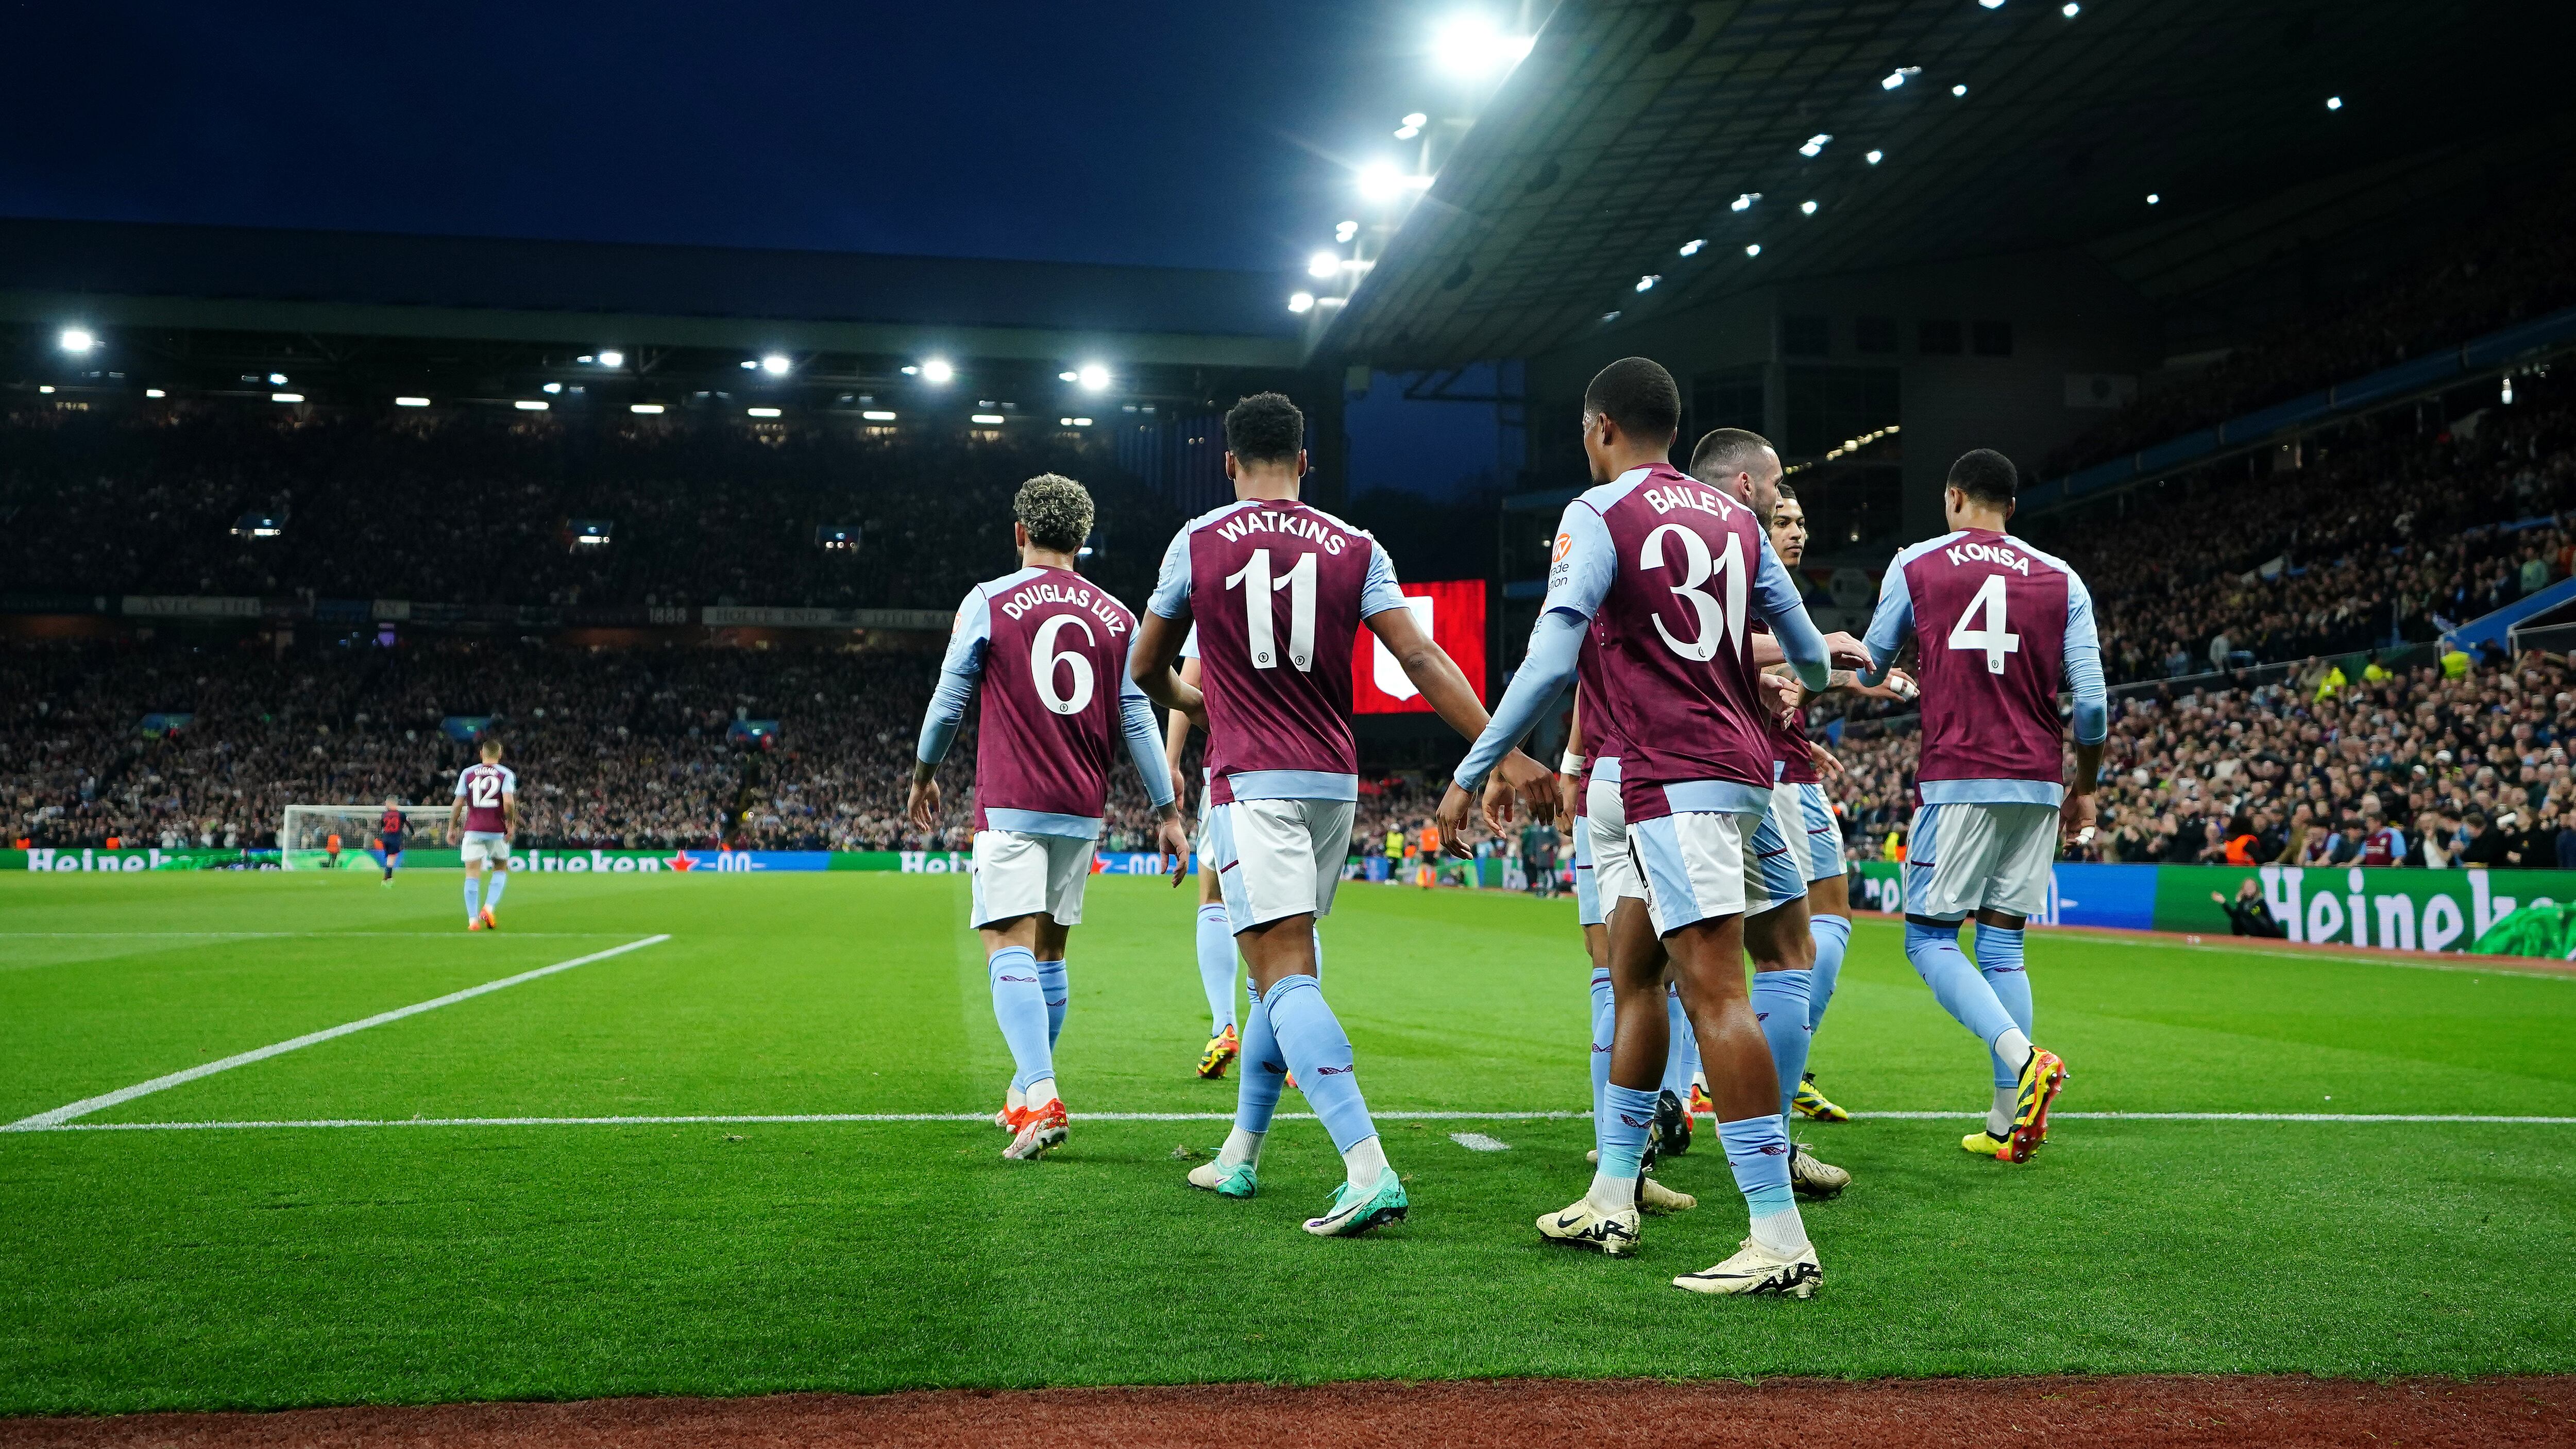 Aston Villa confirmed their spot in the Champions League